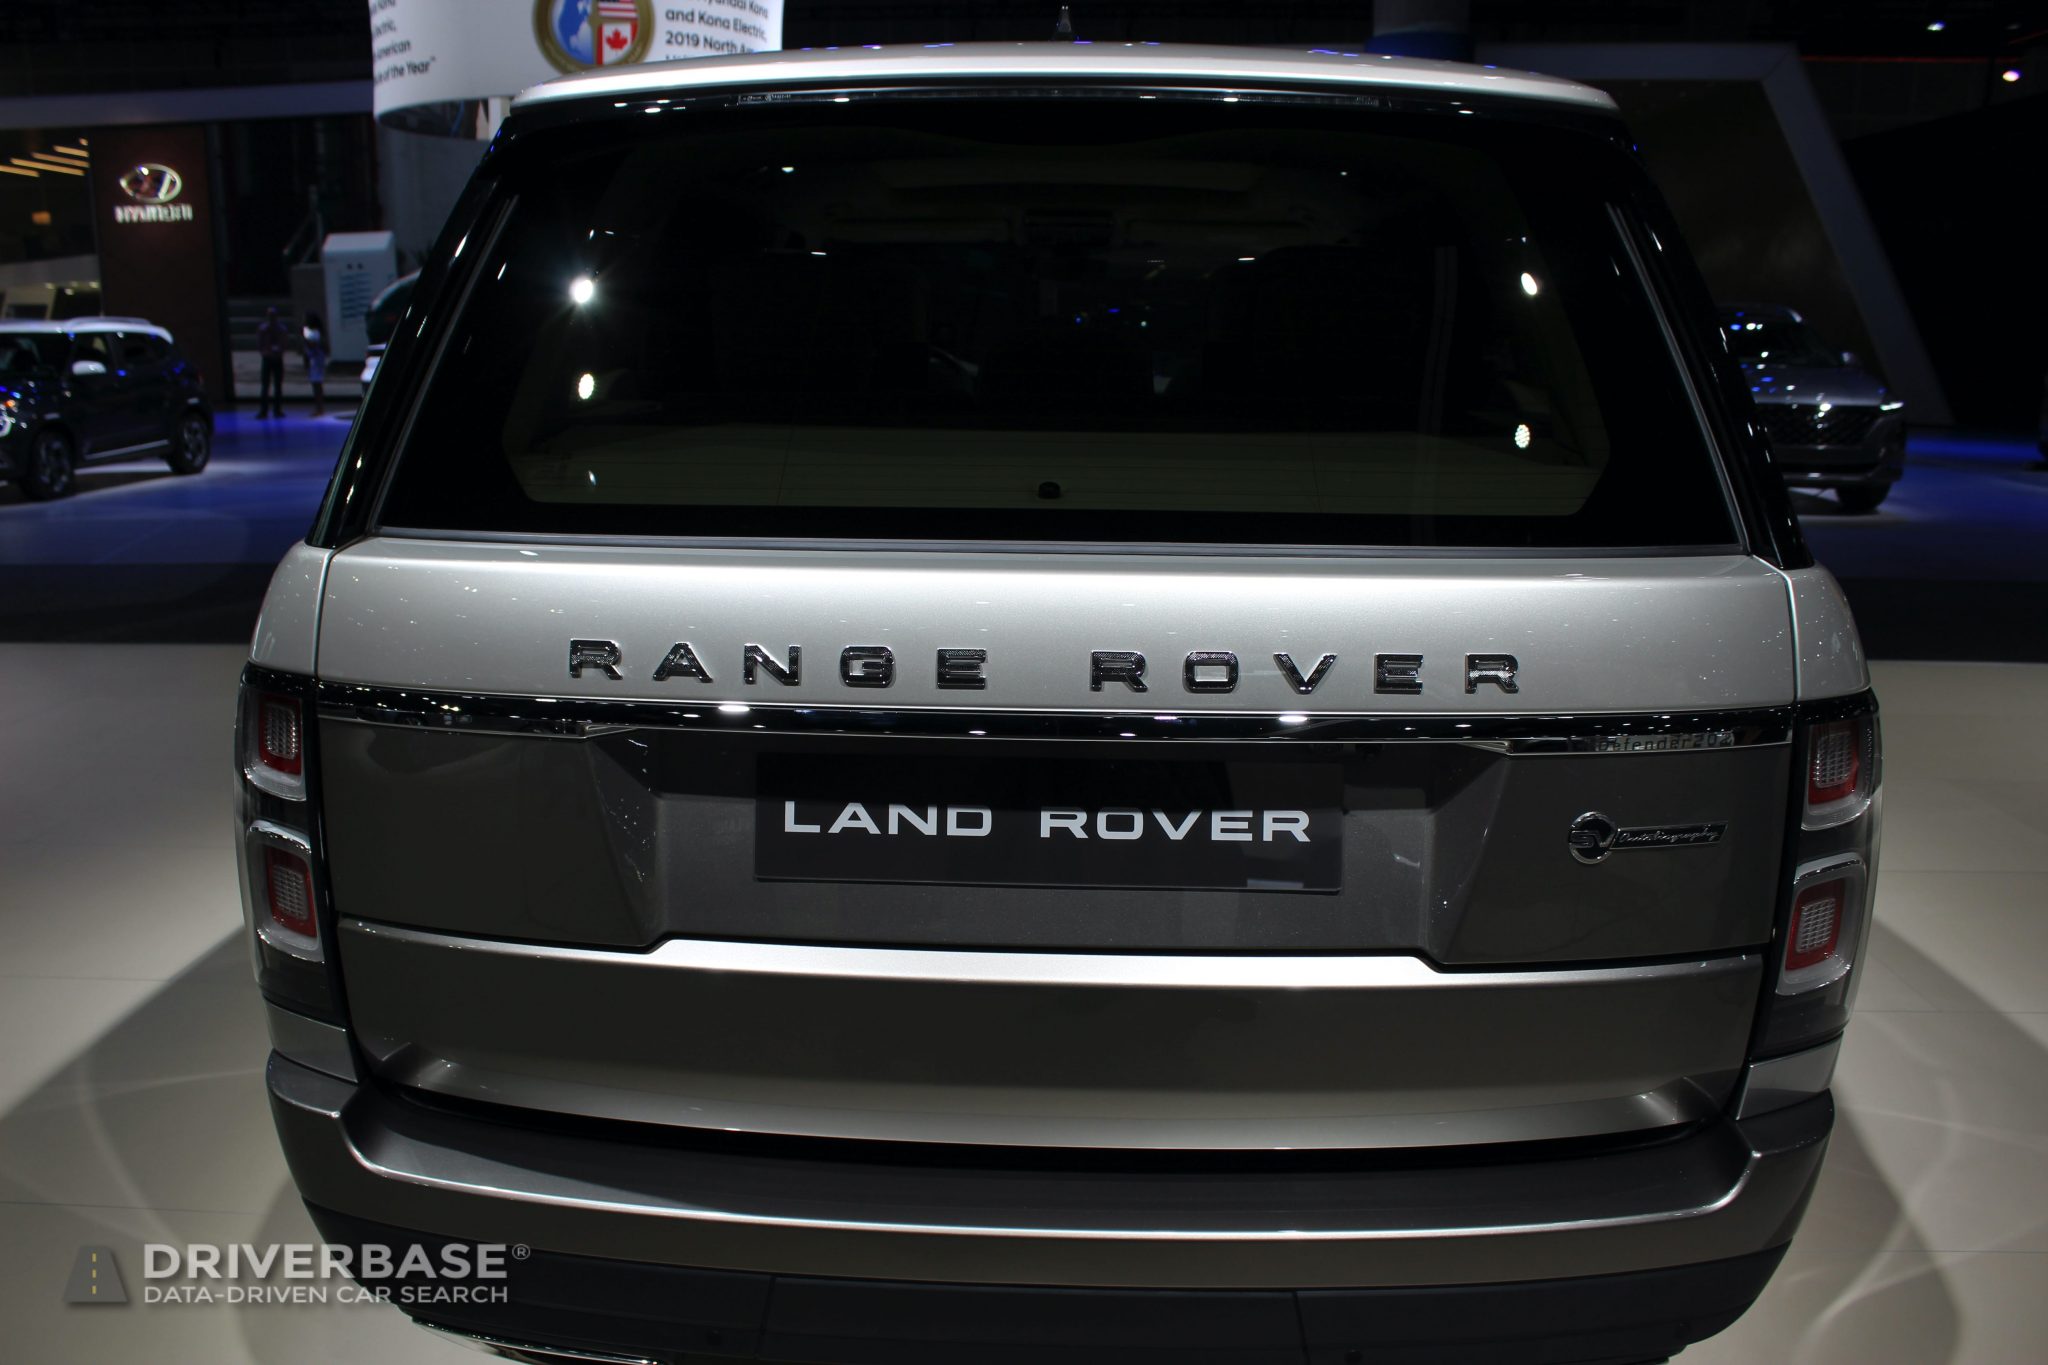 2020 Land Rover Range Rover at the 2019 Los Angeles Auto Show